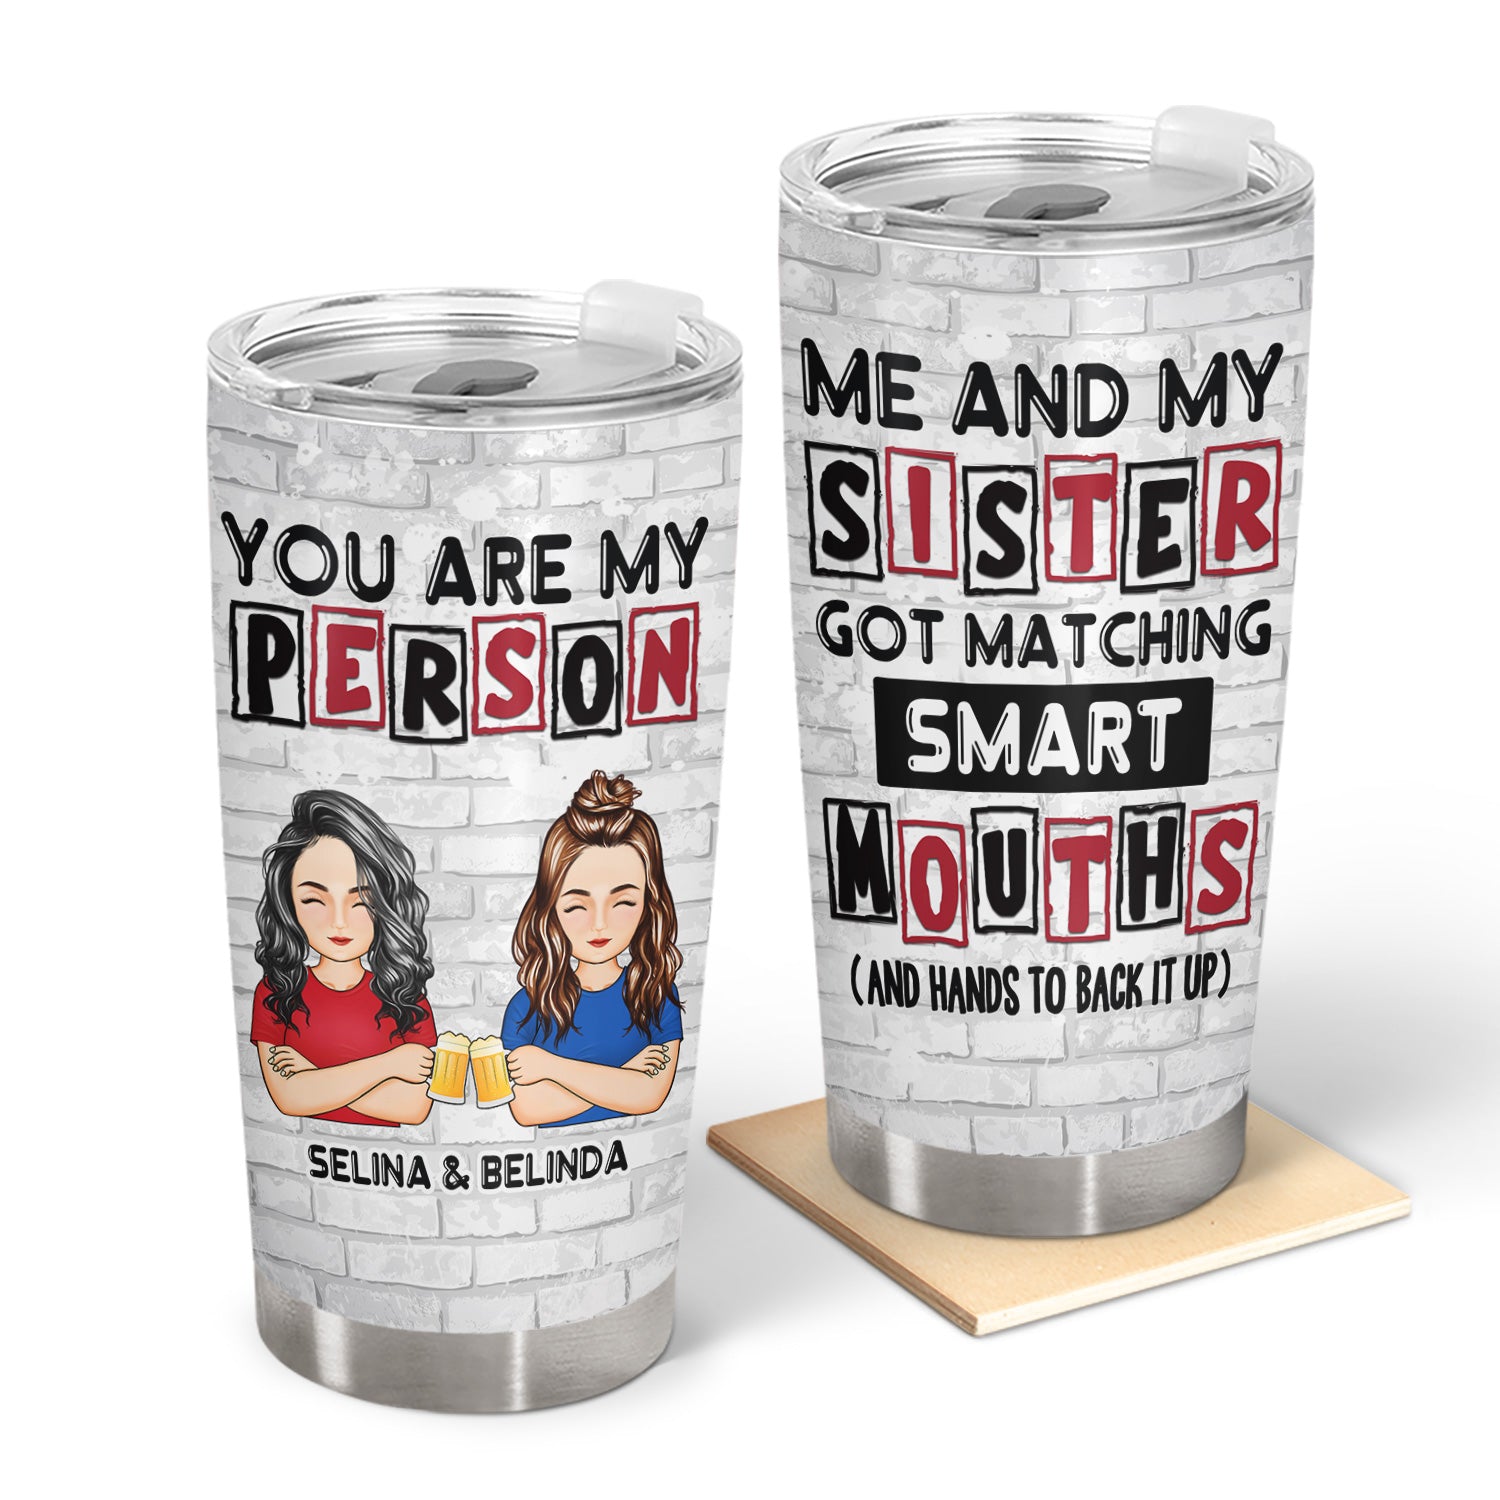 Bestie Sister Cartoon Got Matching Smart Mouths - Gift For Besties - Personalized Tumbler